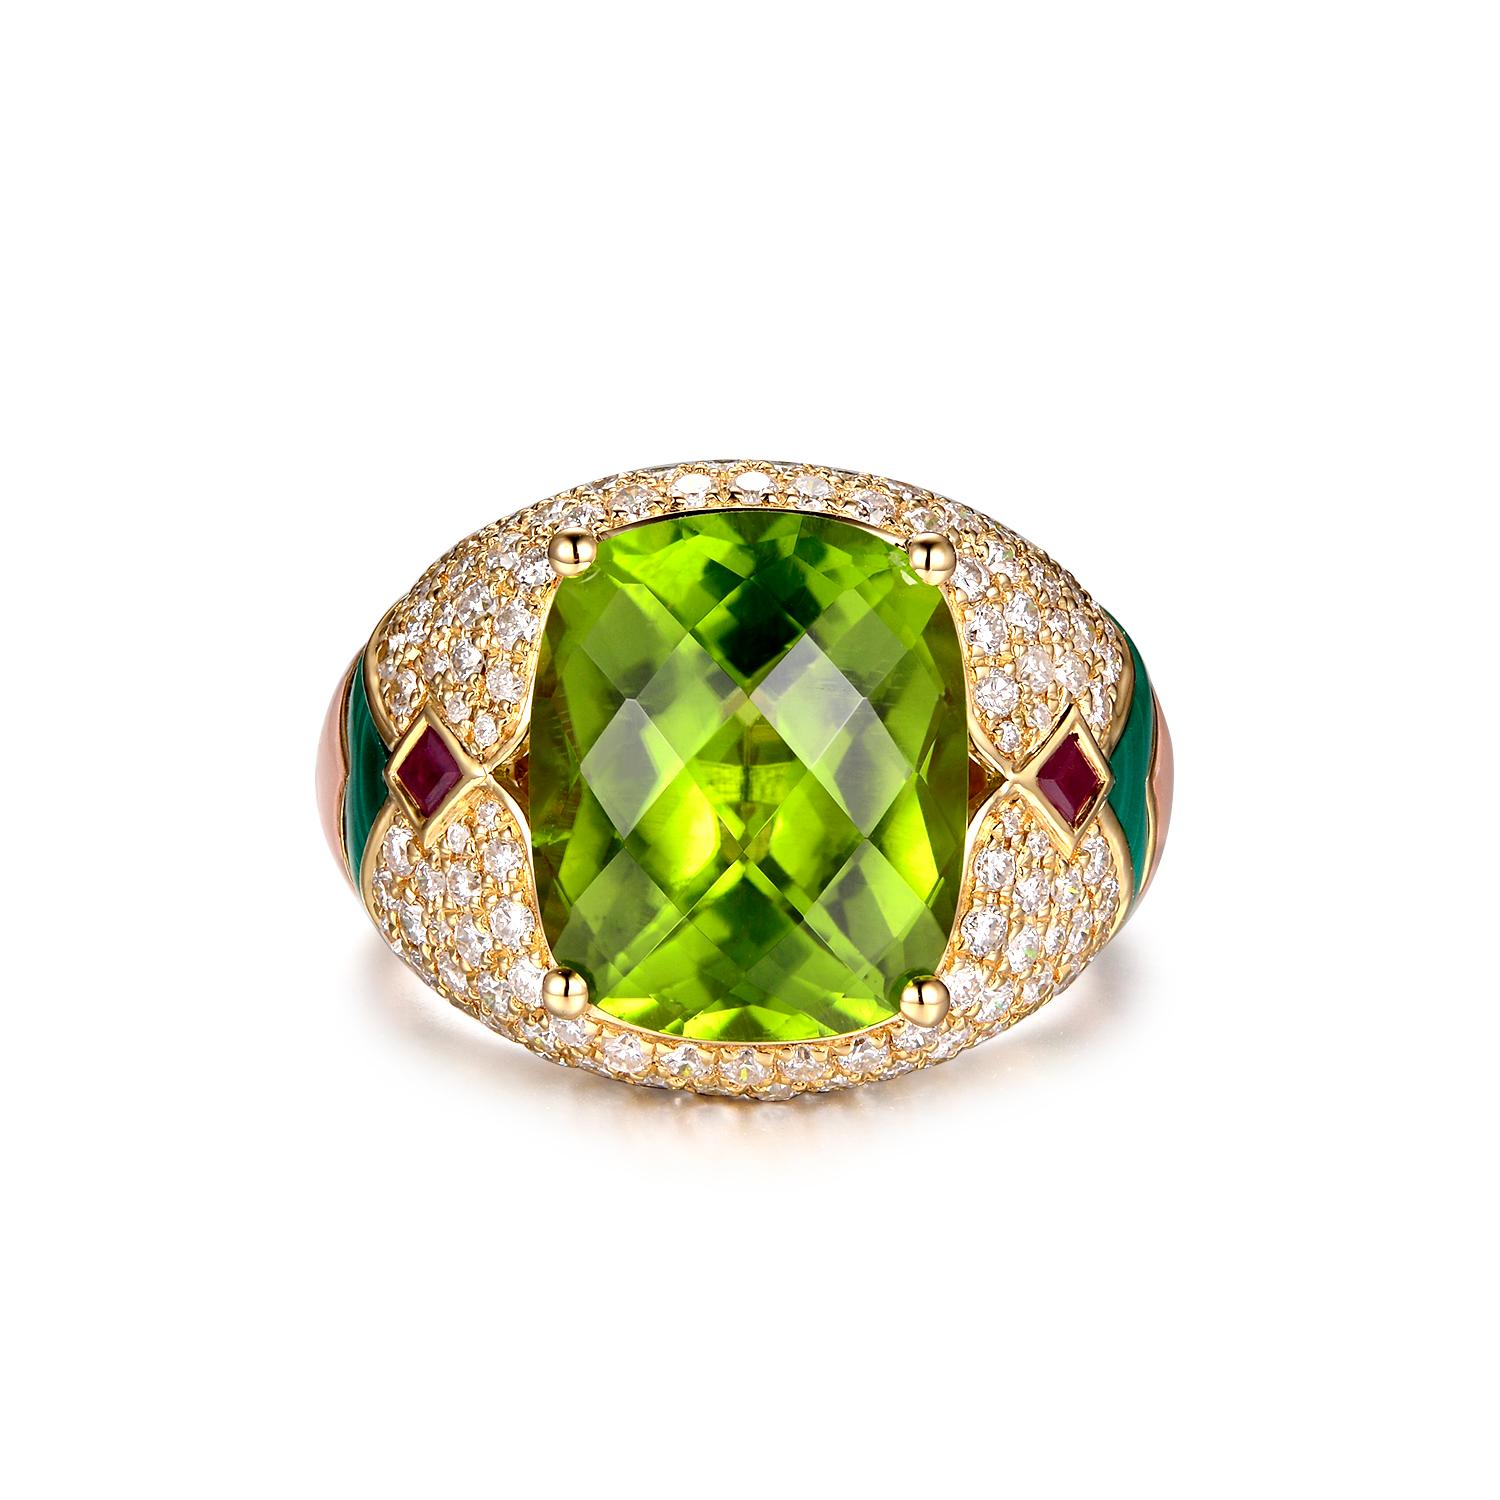 This ring features 7.47 carats of peridot, assented with 1.24 carats of white round diamonds. Malachite and pink opal are handcrafted to fit perfectly into the mounting. 2 princess cut rubies weight 0.12 carat on the side to give more contrast to